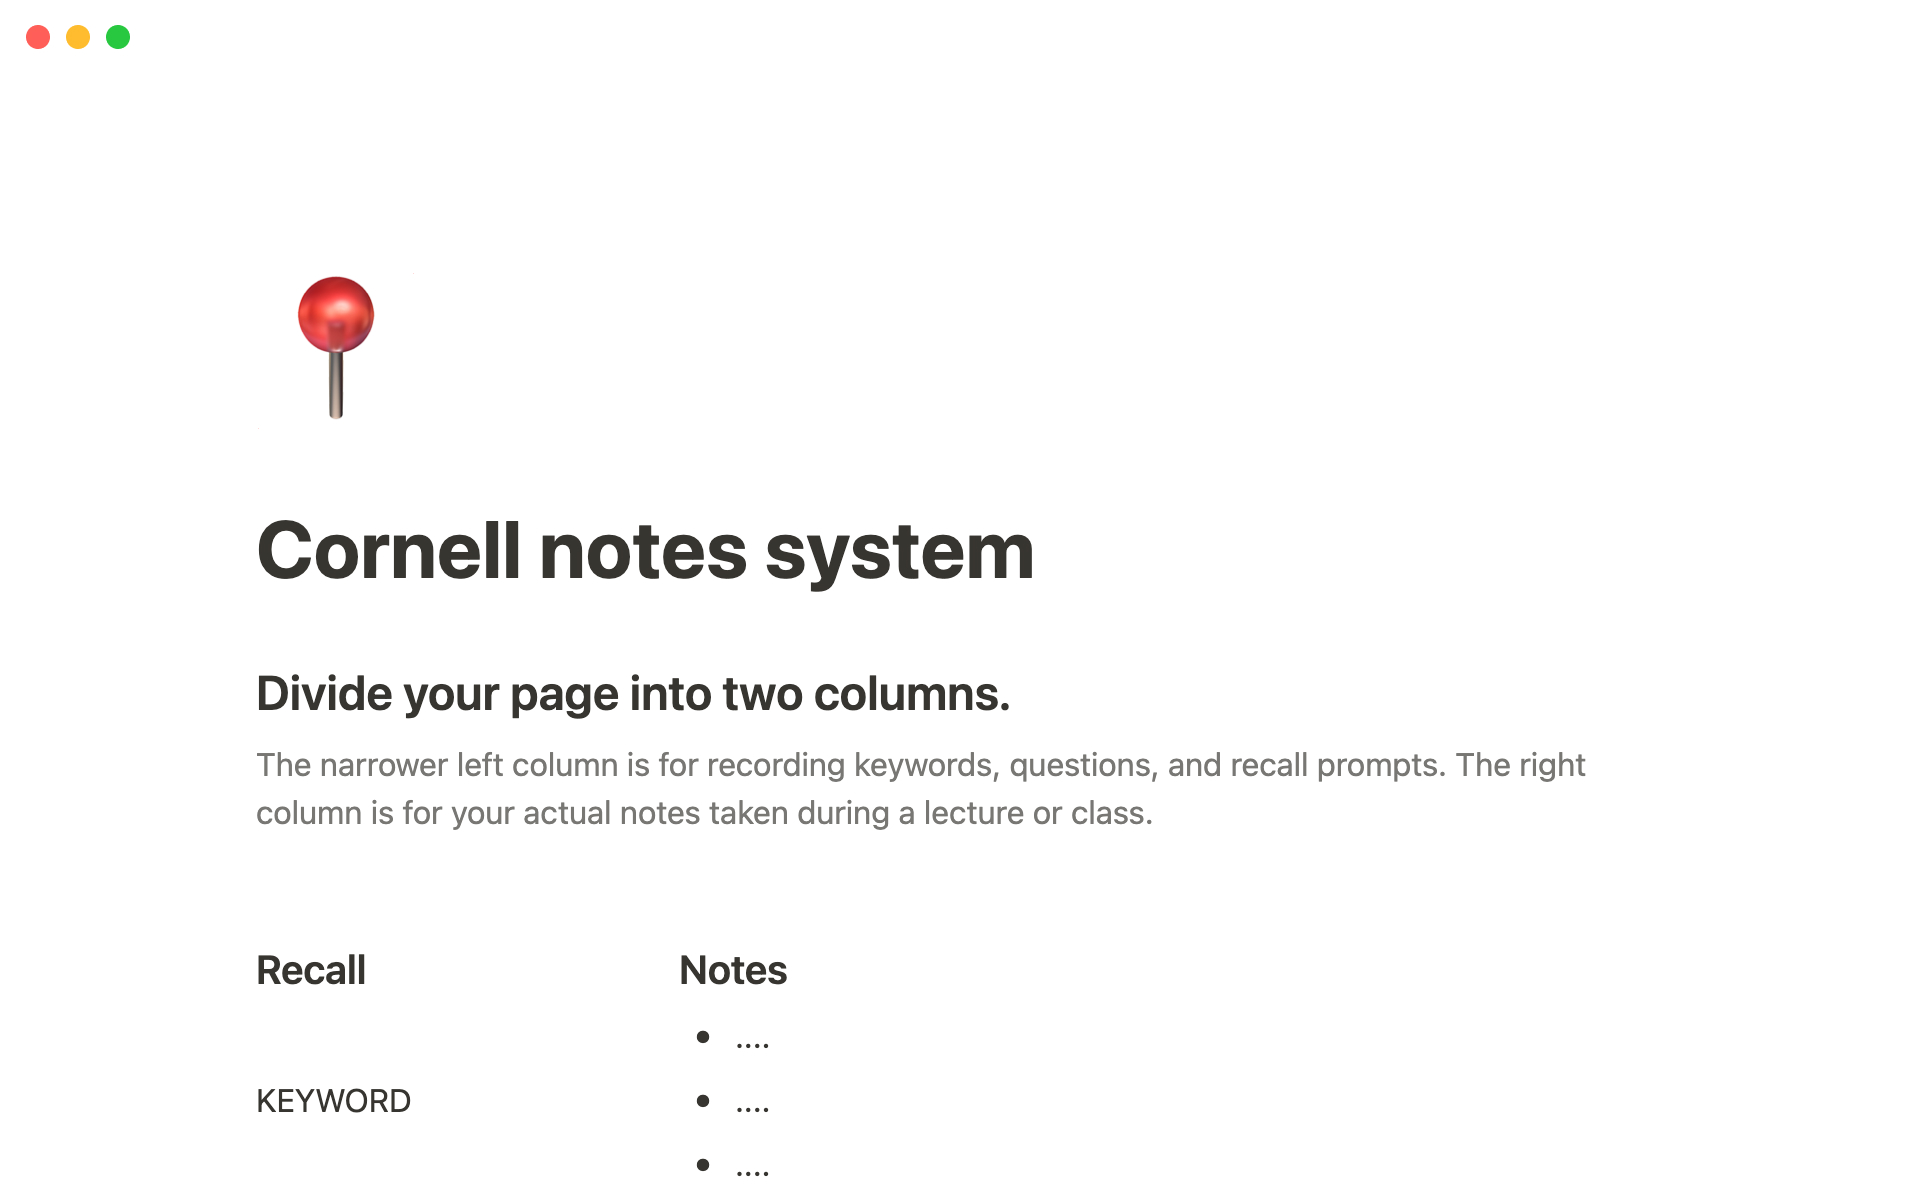 The desktop image for the Cornell notes system template